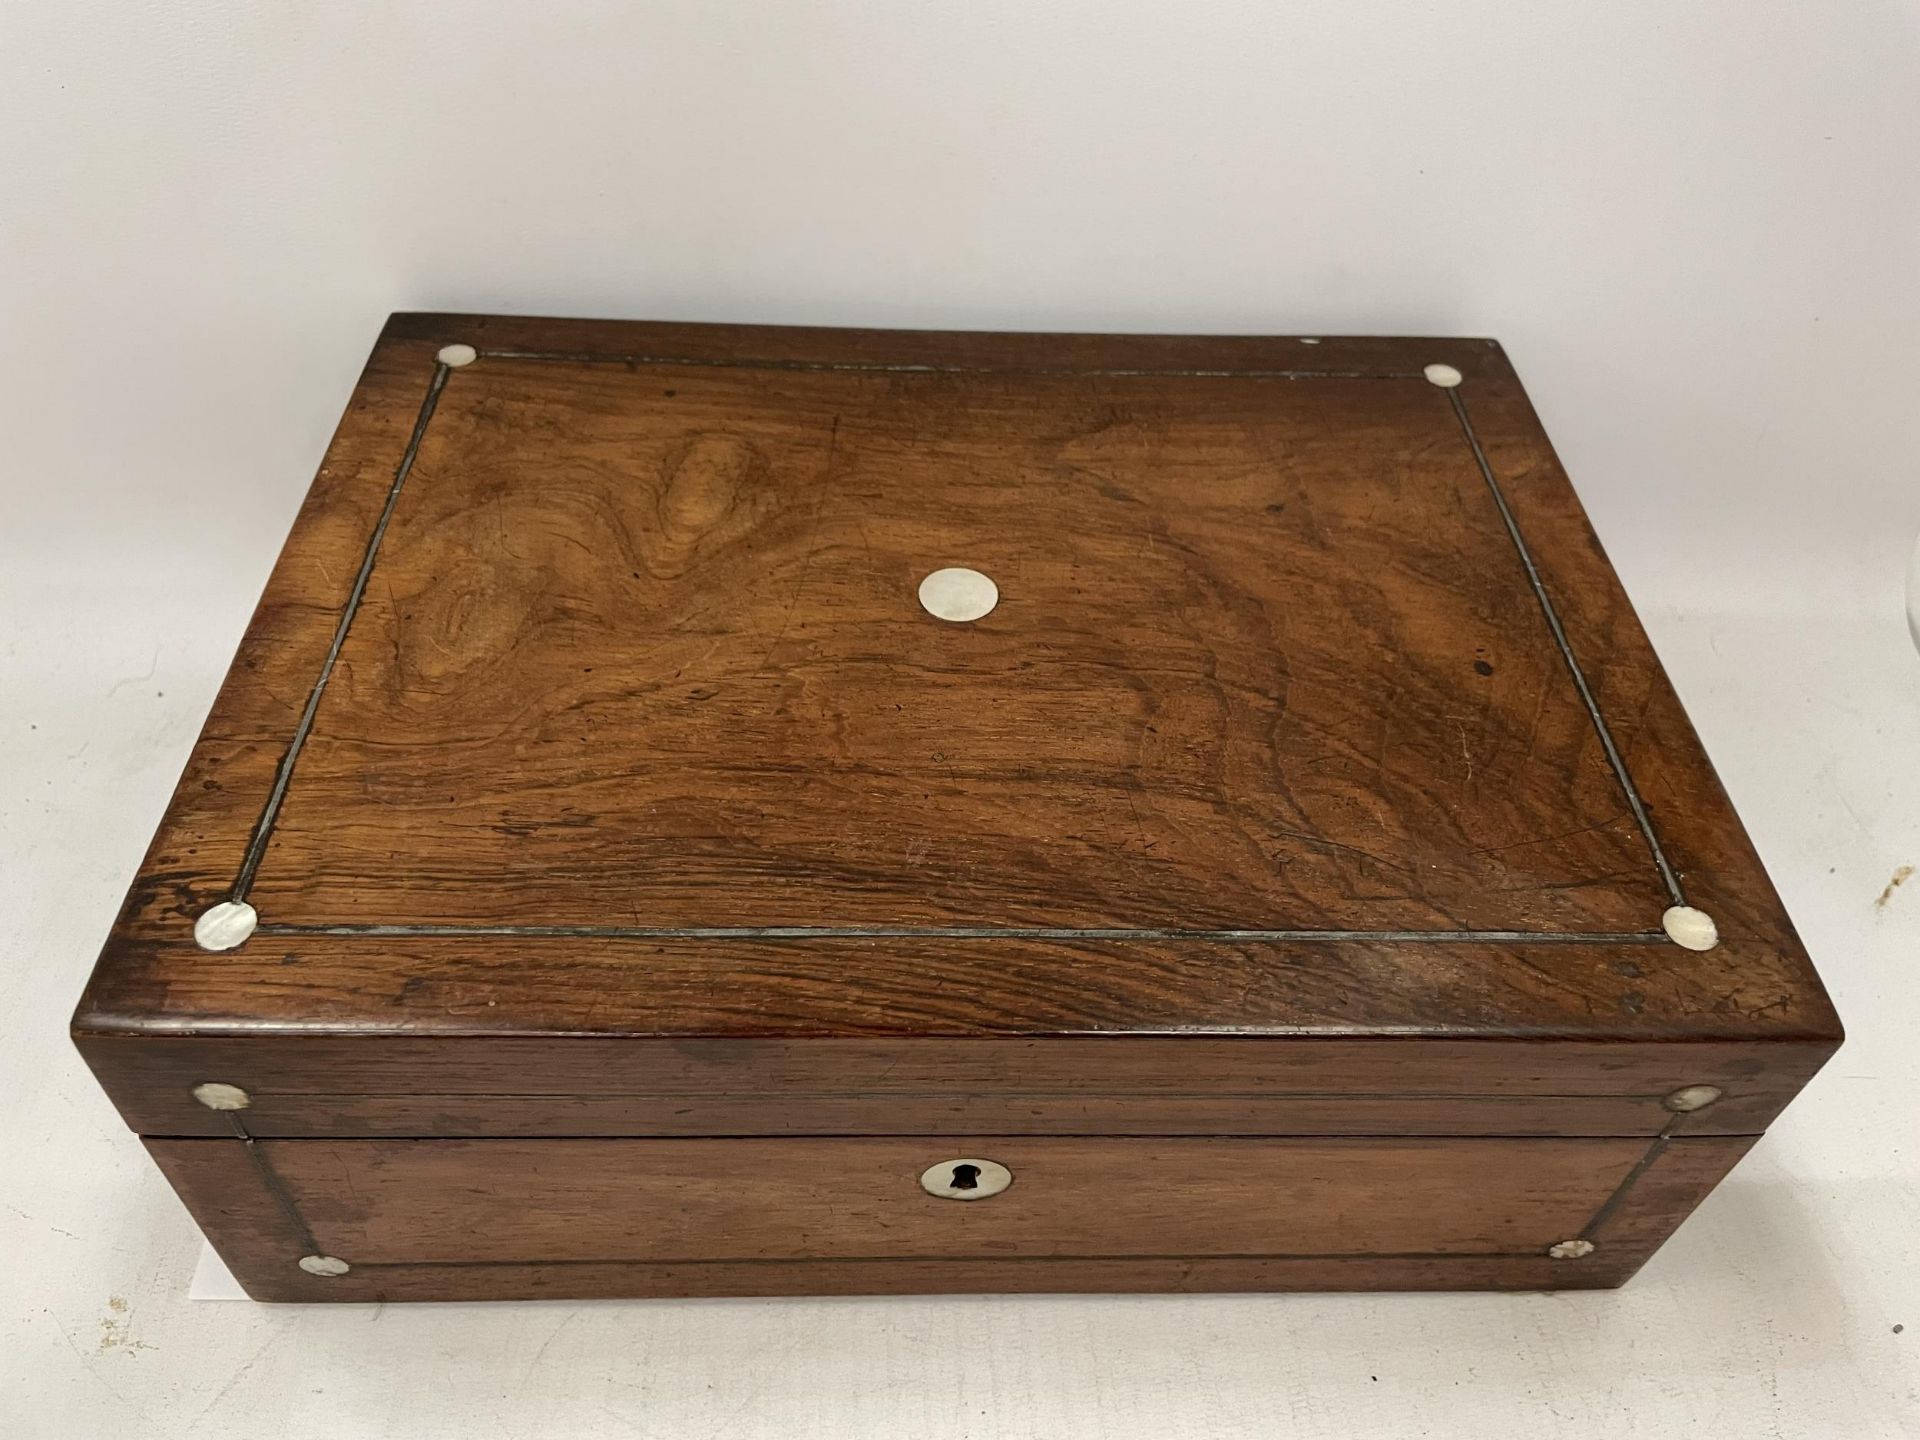 AN ANTIQUE ROSEWOOD JEWELLERY BOX WITH MOTHER OF PEARL INLAY